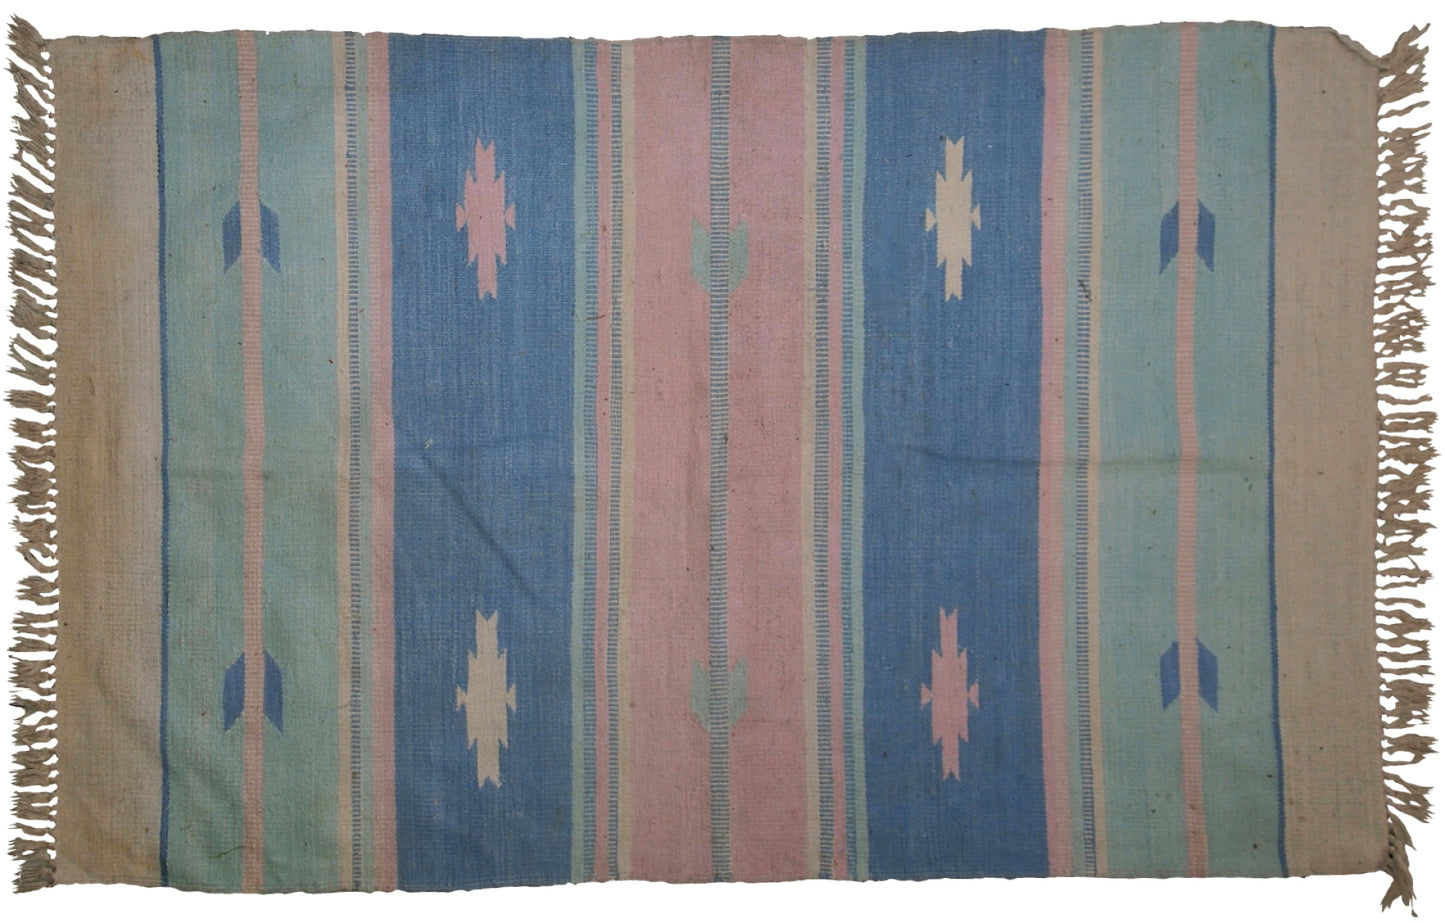 Back view of the vintage Indian Dhurri kilim, revealing its high-quality cotton craftsmanship